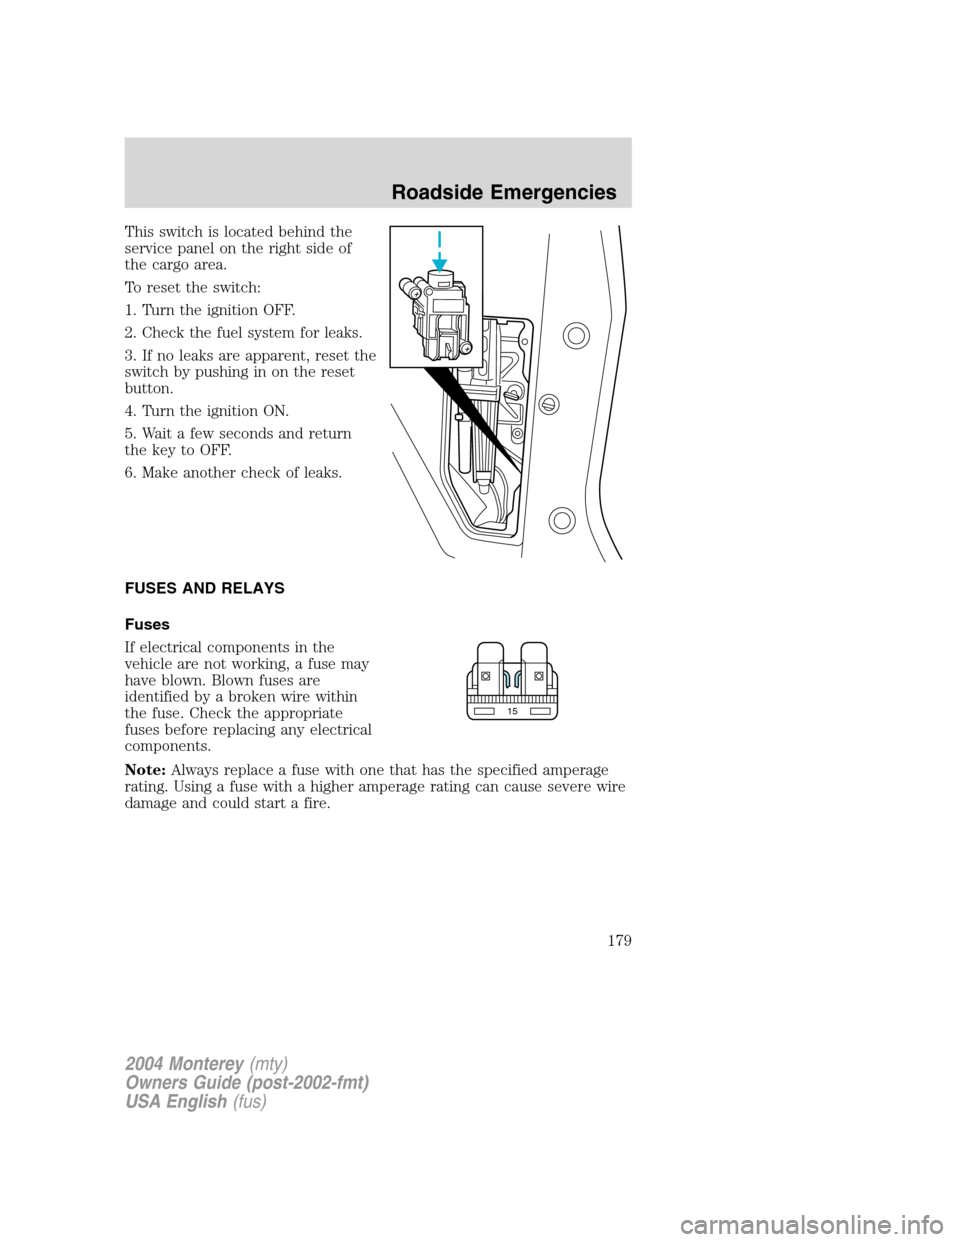 Mercury Monterey 2004  Owners Manuals This switch is located behind the
service panel on the right side of
the cargo area.
To reset the switch:
1. Turn the ignition OFF.
2. Check the fuel system for leaks.
3. If no leaks are apparent, res